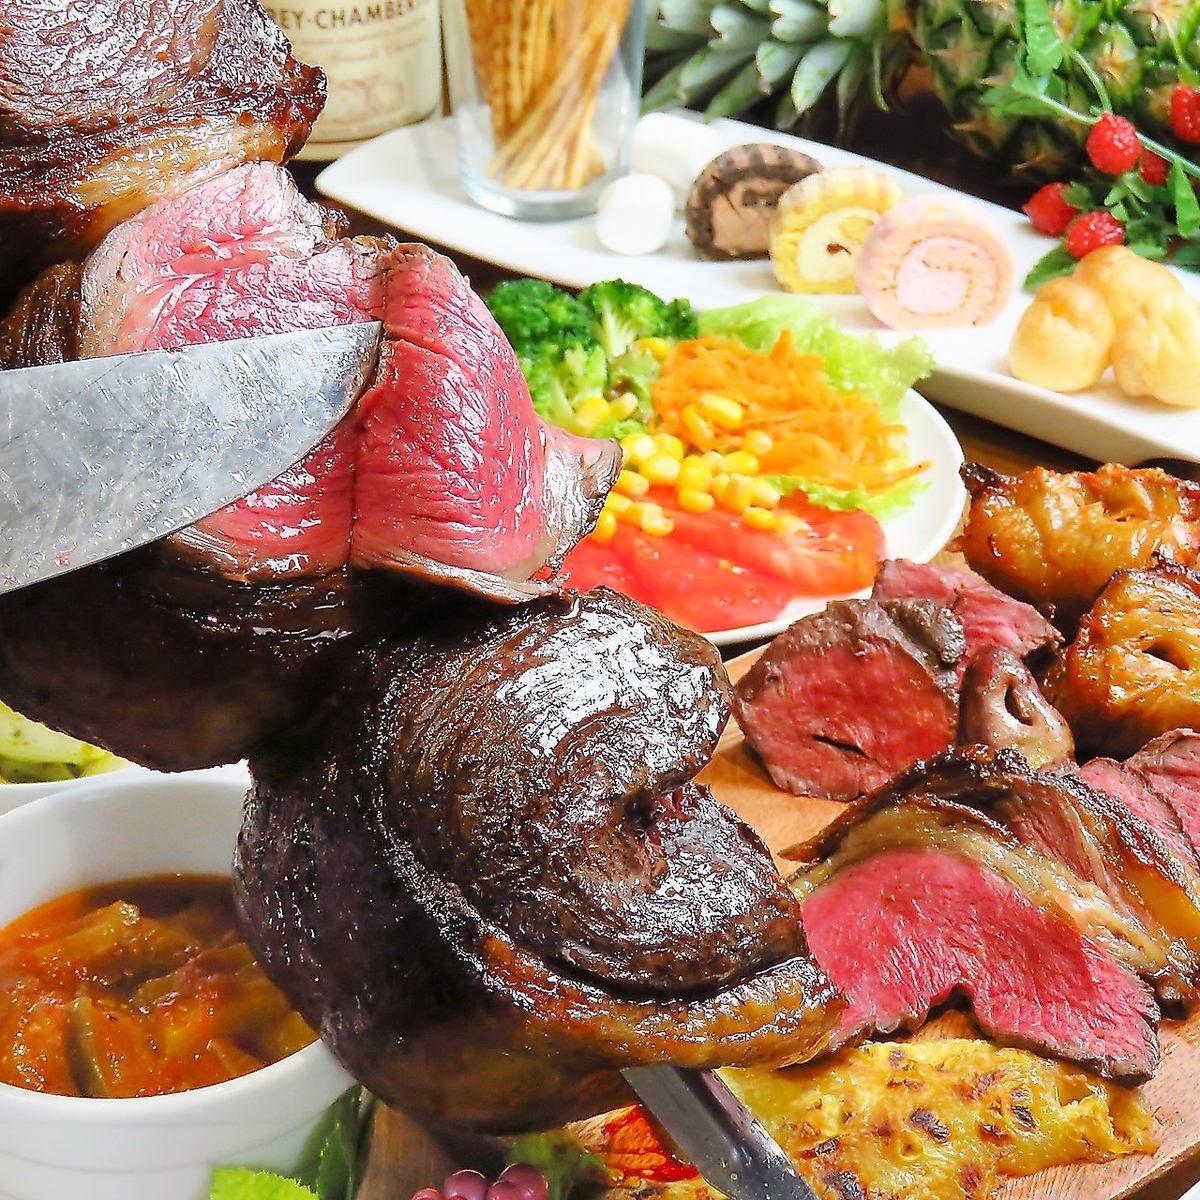 ★☆★☆★ Superb meat dish Churrasco and surprise plate are very popular ★★★☆★